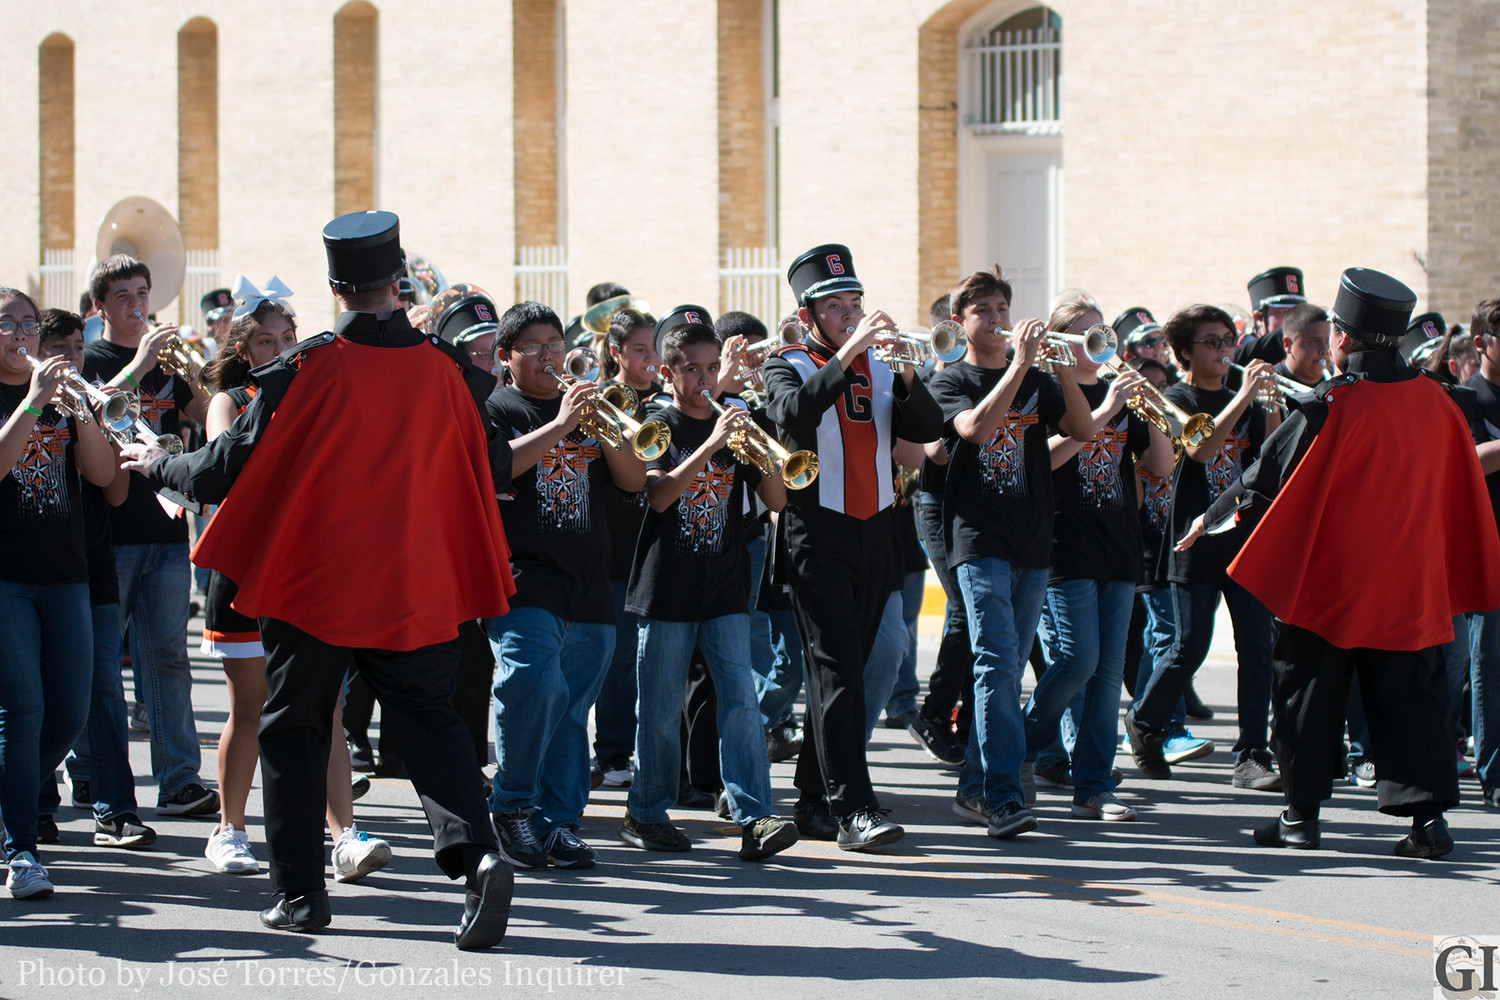 The Mighty Apache Band has performed at various events including the Come and Take It parade using 17-year-old uniforms. The outdated, worn-out pieces of clothing are older than most of the band students who had to wear them this year.